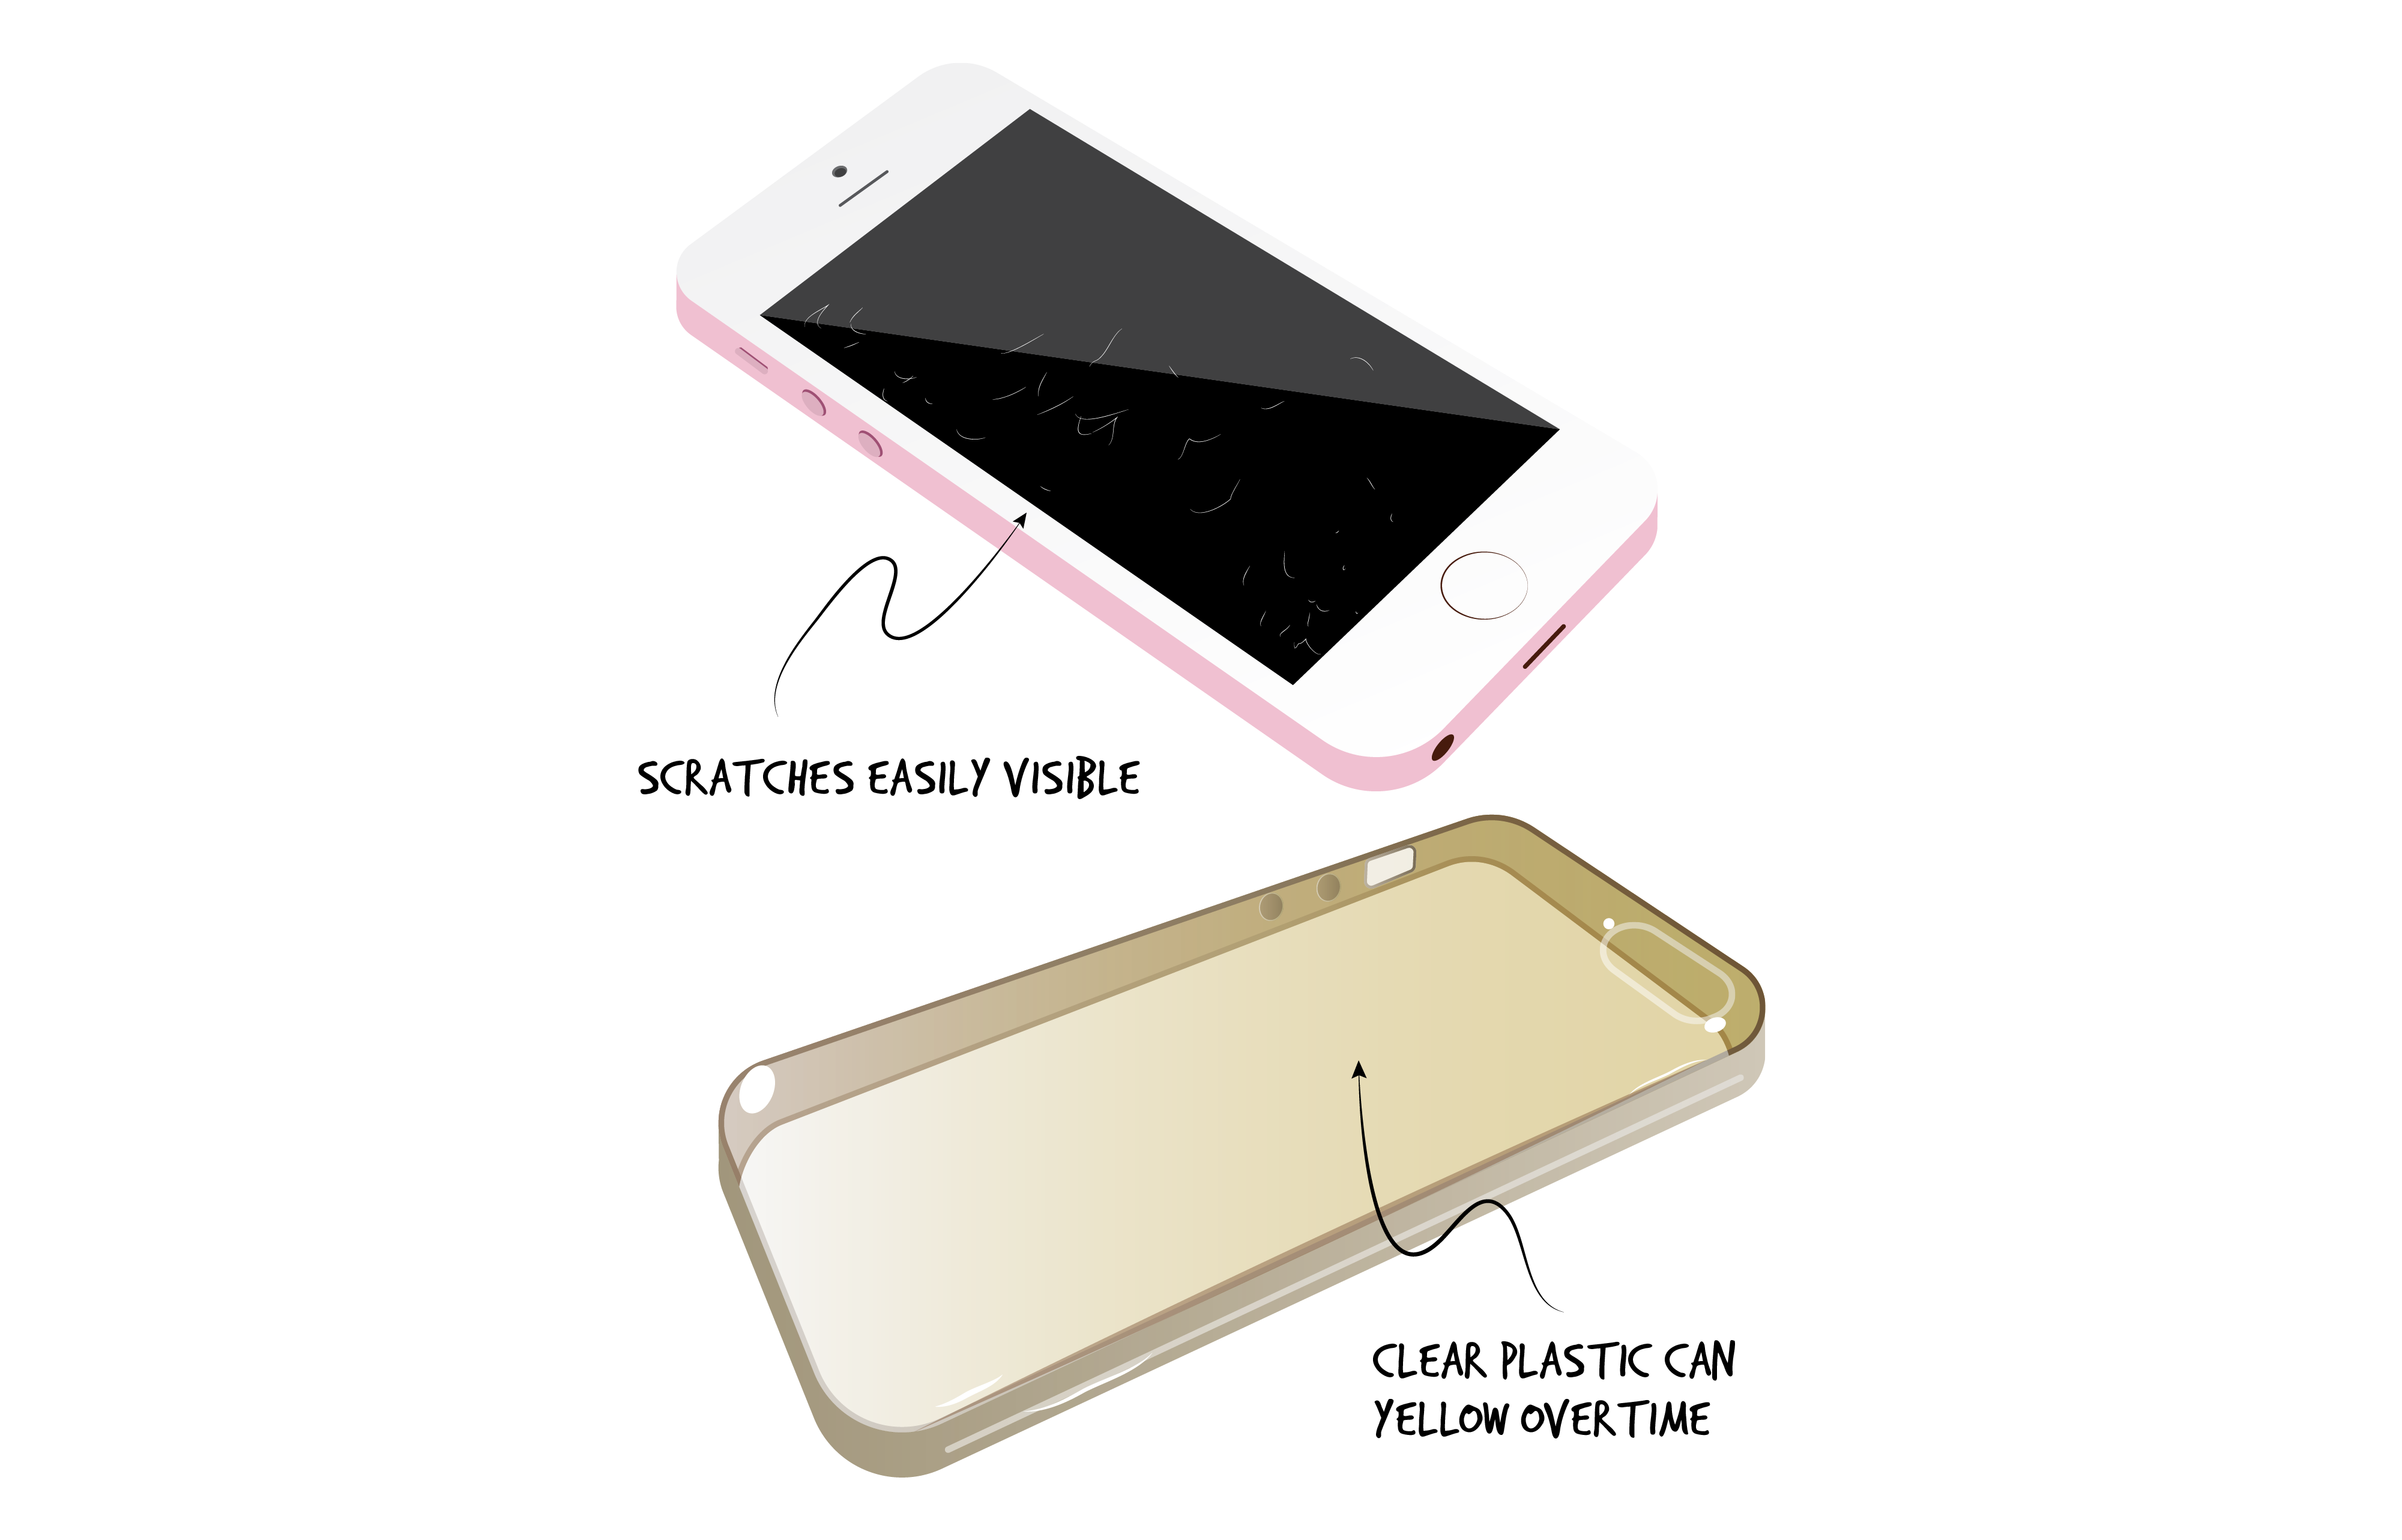 On the top, a white and black smartphone is shown with scratches on the screen. Text: Scratches easily visible. On the bottom, a clear yellowing phone case with text: Clear plastic can yellow over time.